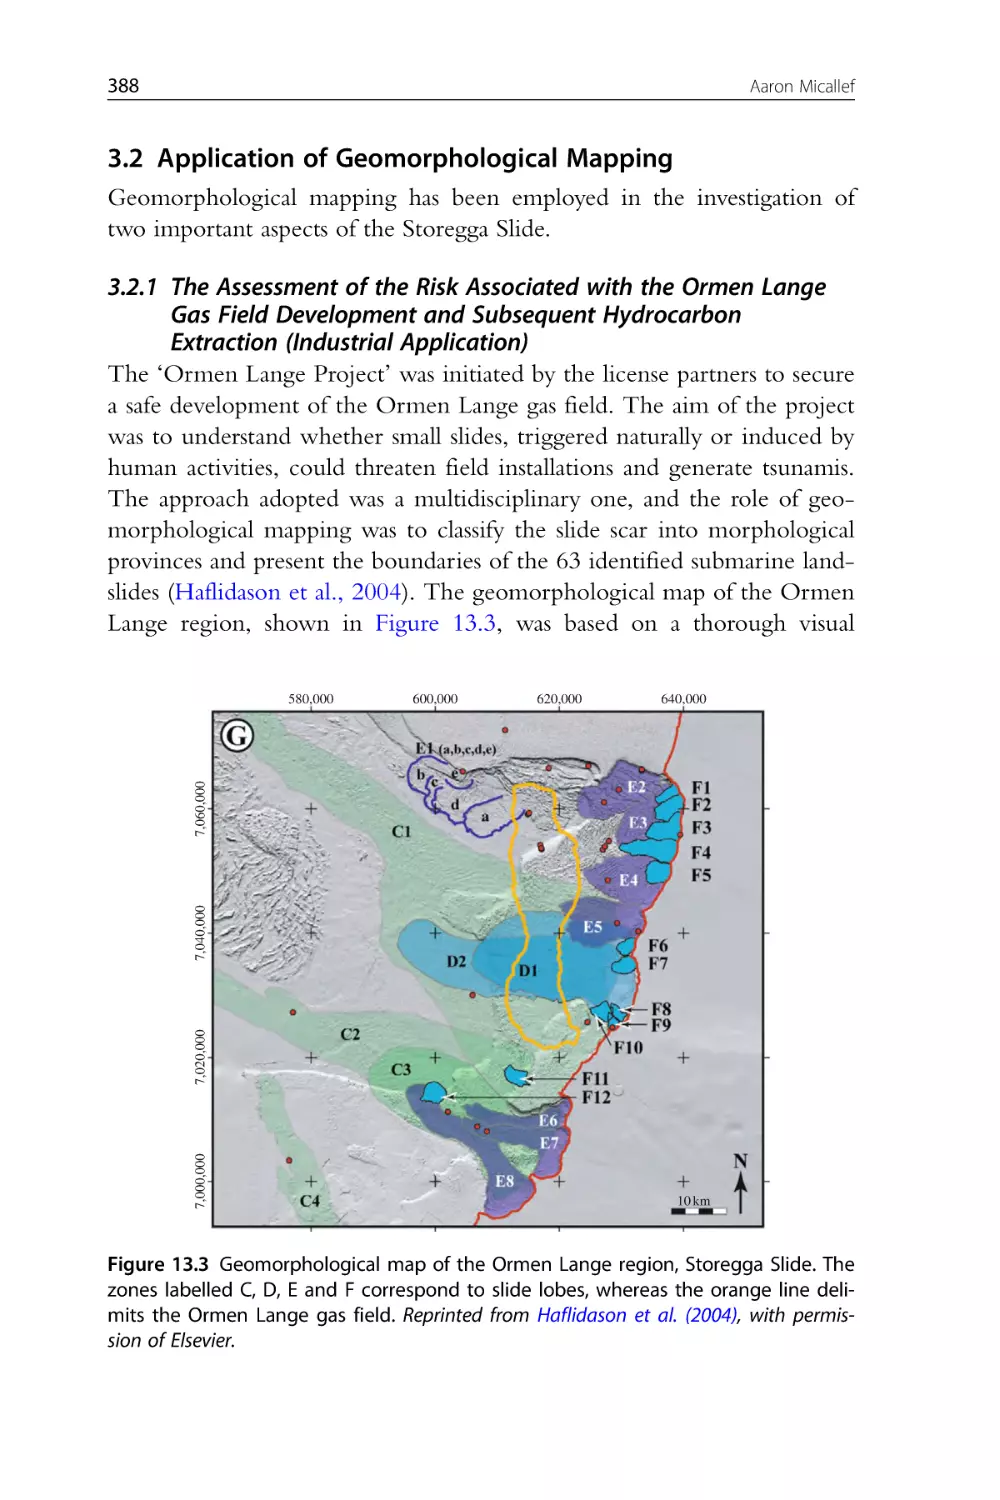 3.2 Application of Geomorphological Mapping
3.2.1 The Assessment of the Risk Associated with the Ormen Lange Gas Field Development and Subsequent Hydrocarbon Extractio...